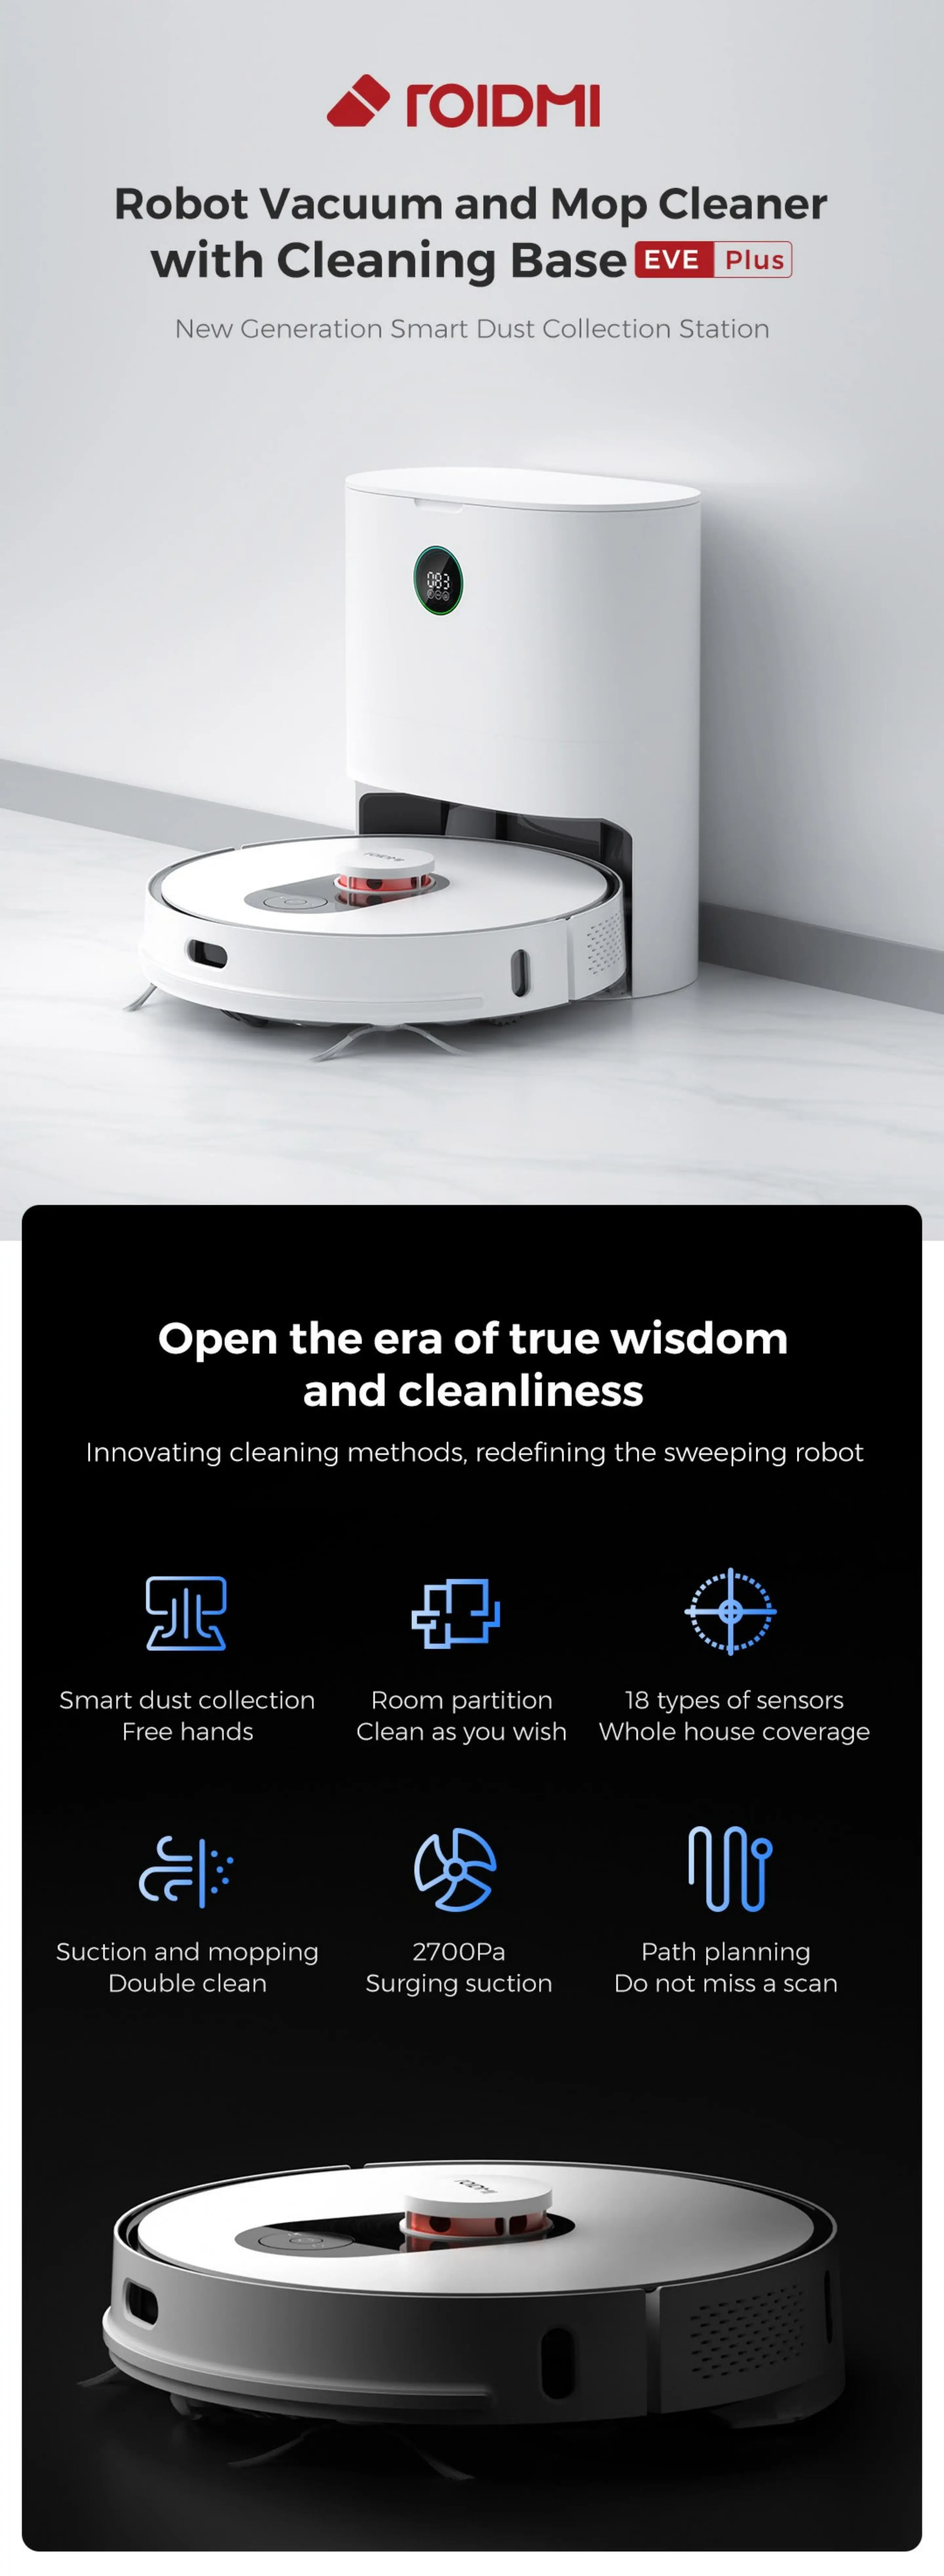 XiaomiRoidmi EVE Plus Robot Vacuum Large Dustbin With Dust Collection System Google Assistant Supports Intelligent